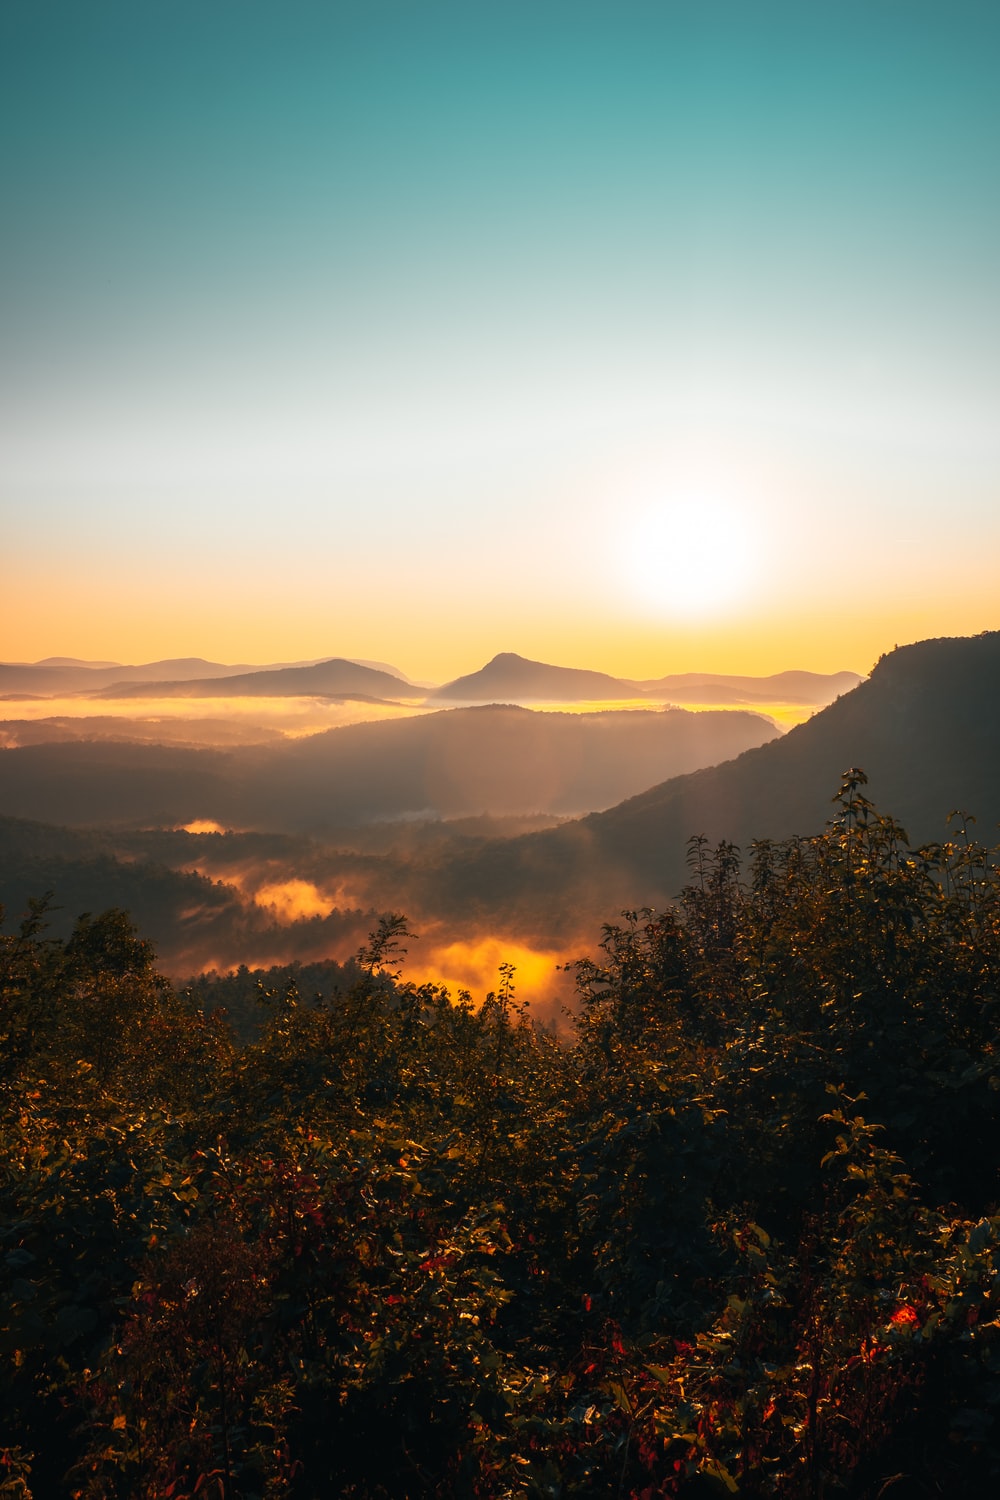 Mountain Sunset Picture. Download Free Image